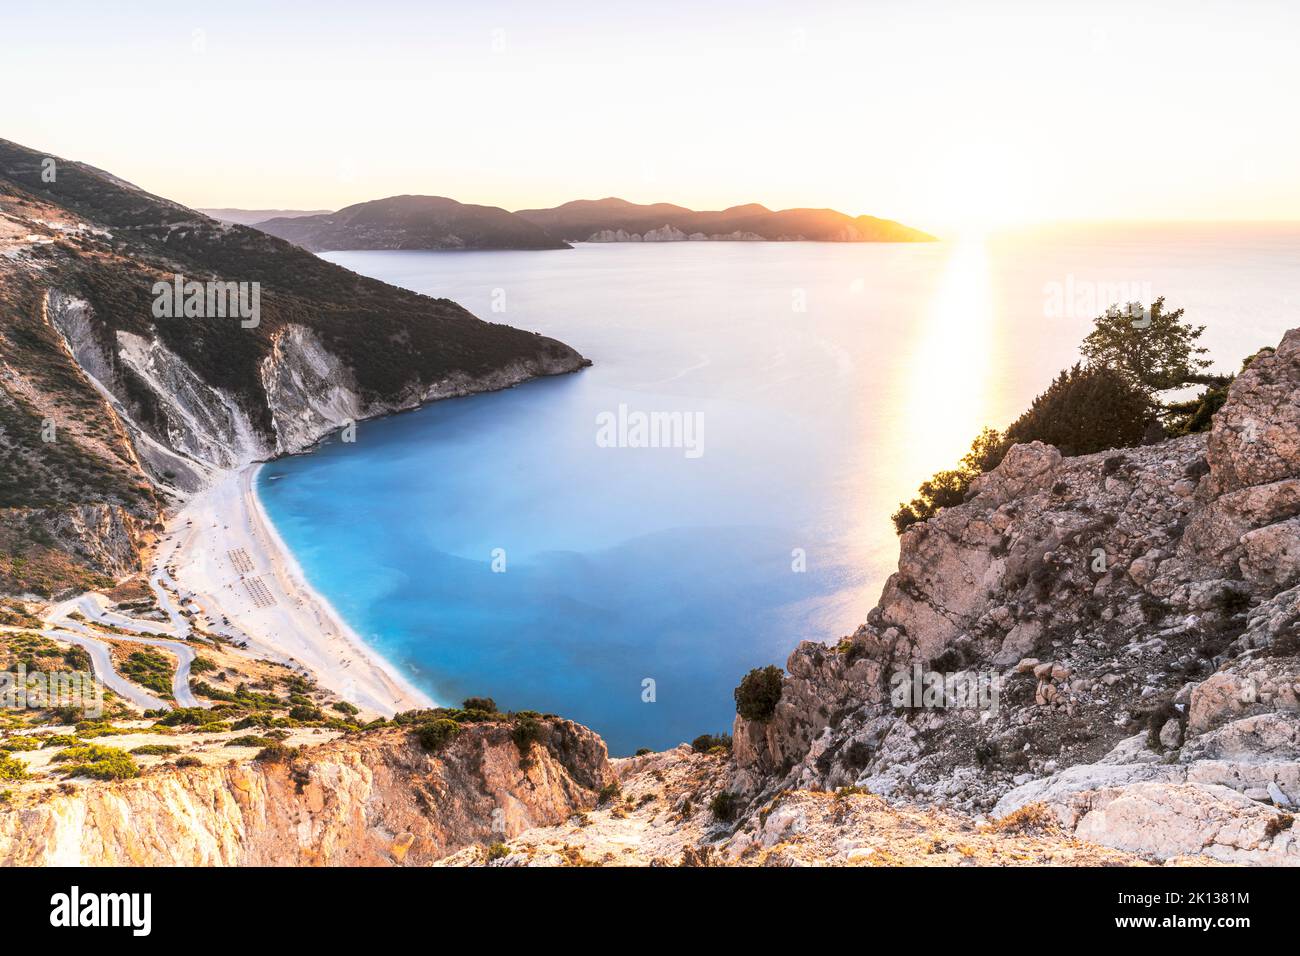 Sunset reflecting in the blue Ionian Sea surrounding Myrtos beach, view from high cliffs, Kefalonia, Greek Islands, Greece, Europe Stock Photo